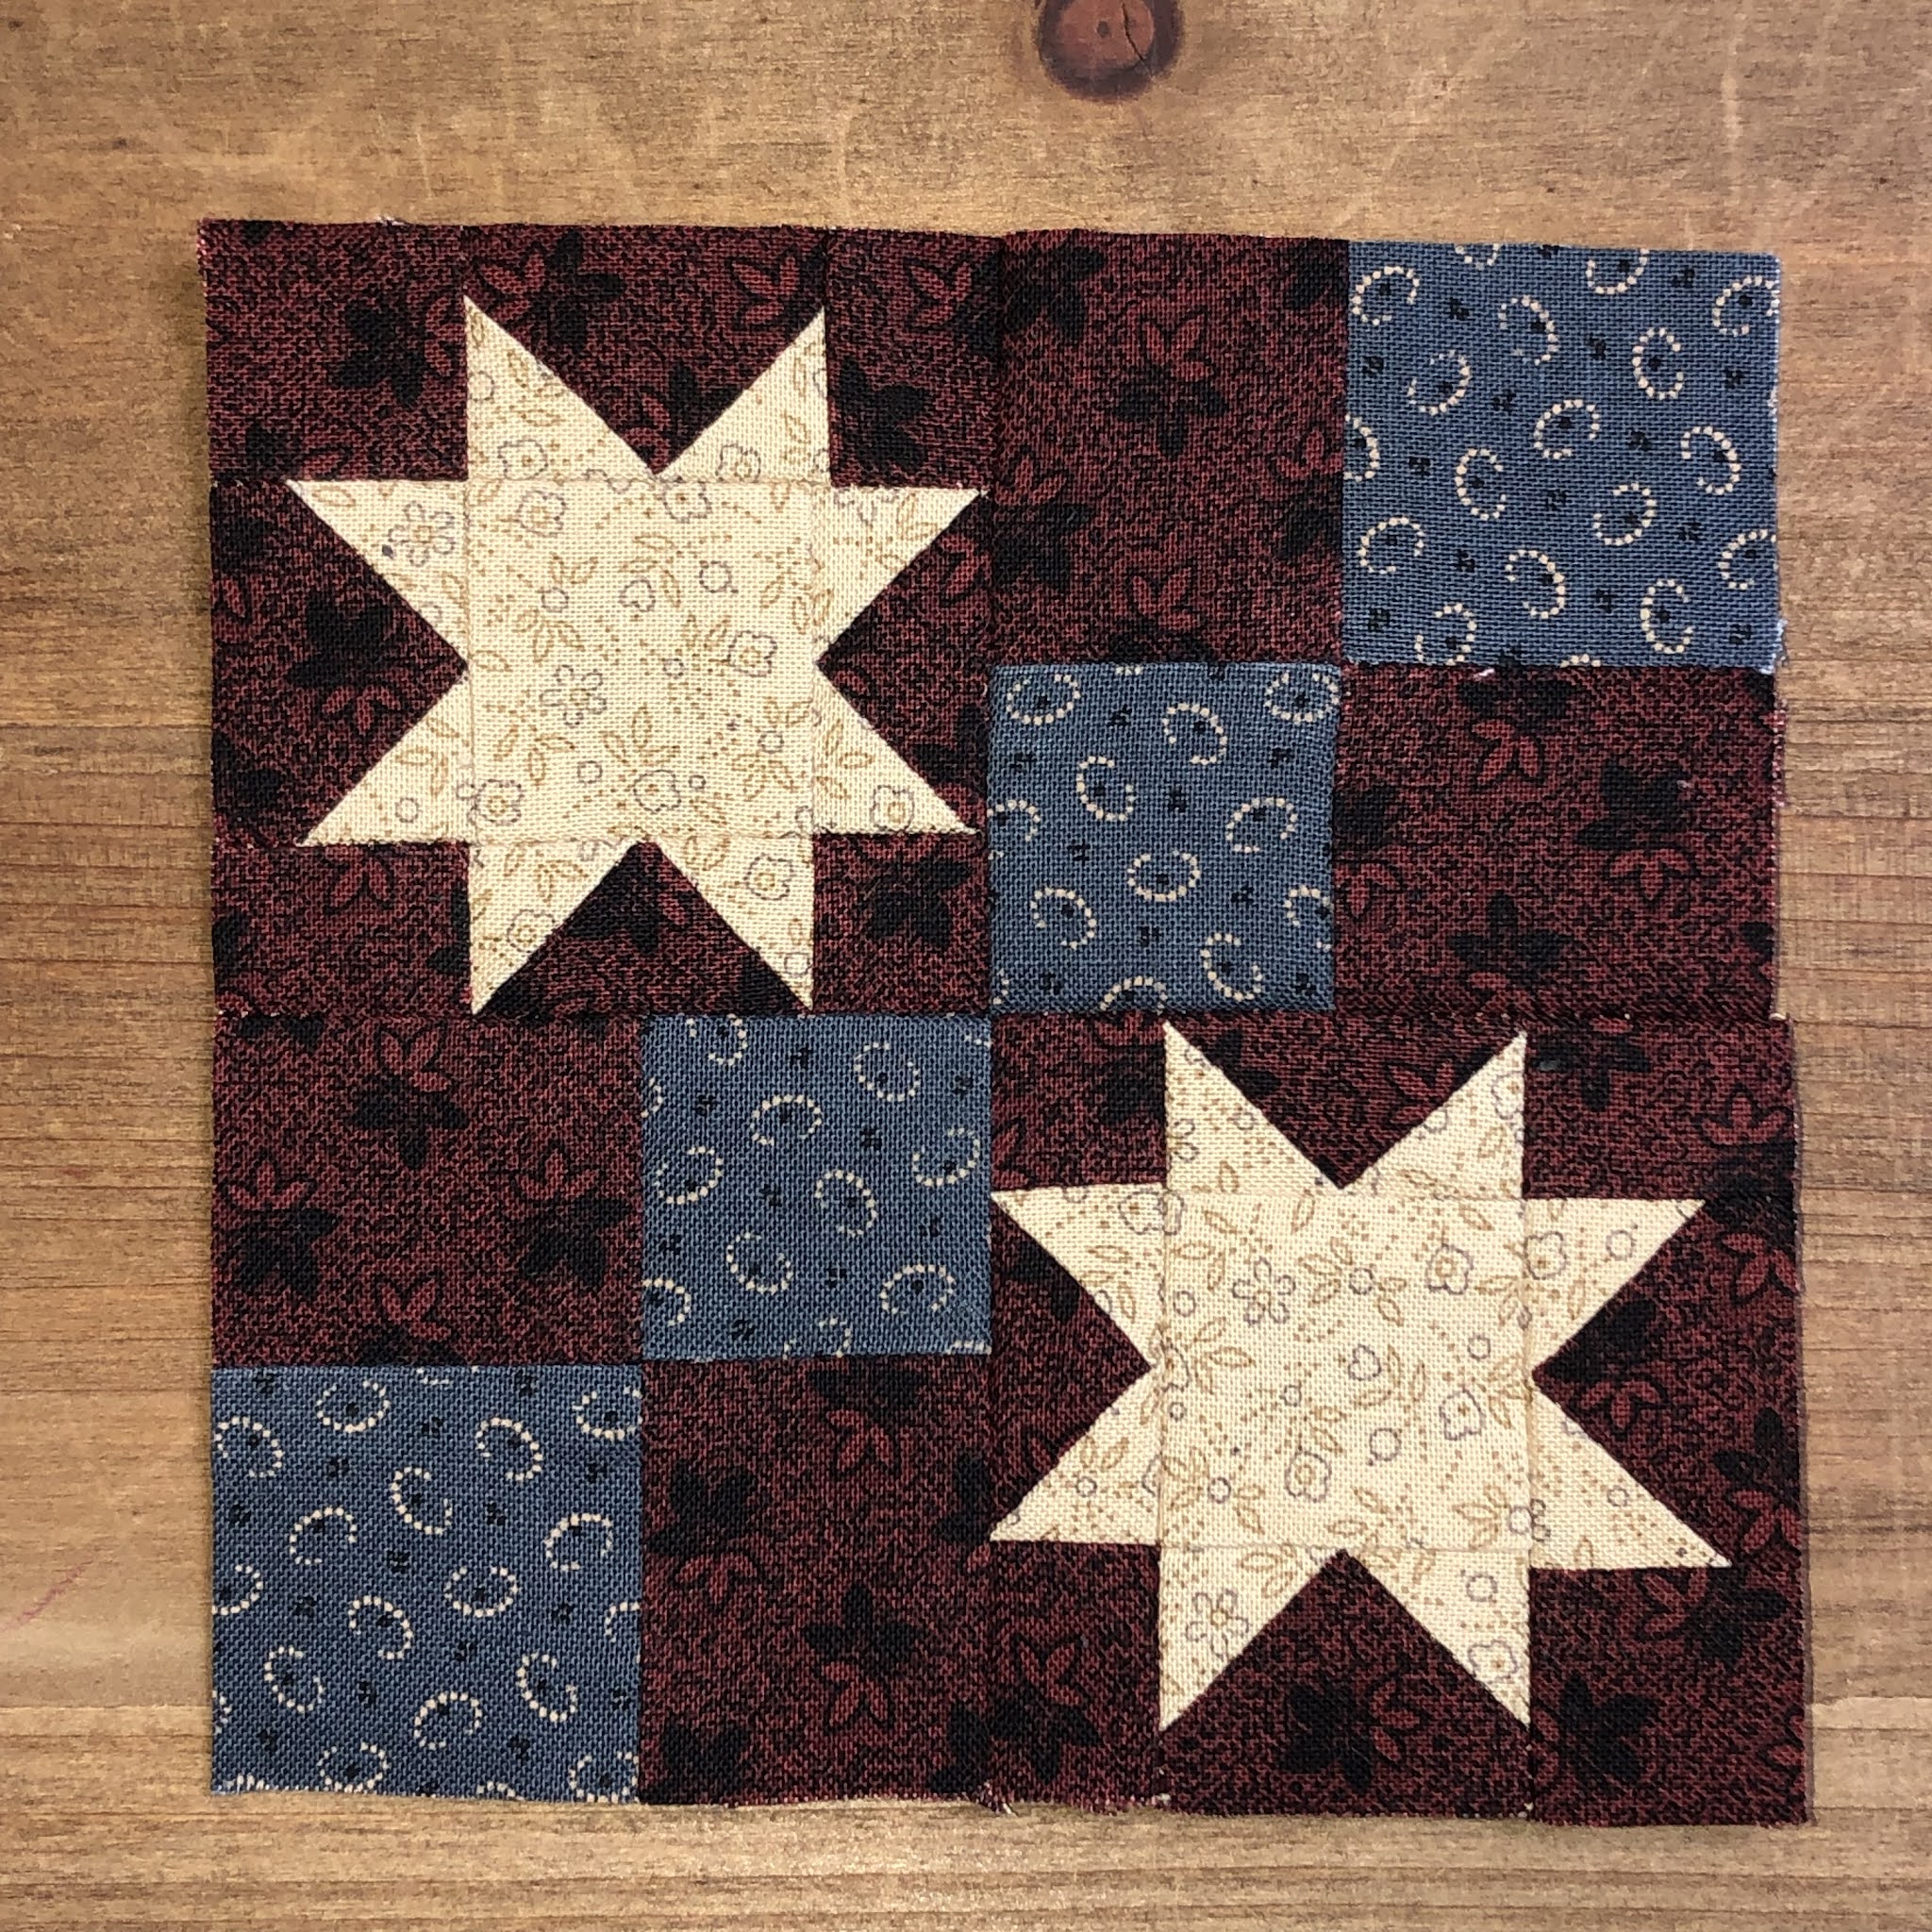 Heartspun Quilts ~ Pam Buda: About Starching Your Fabric